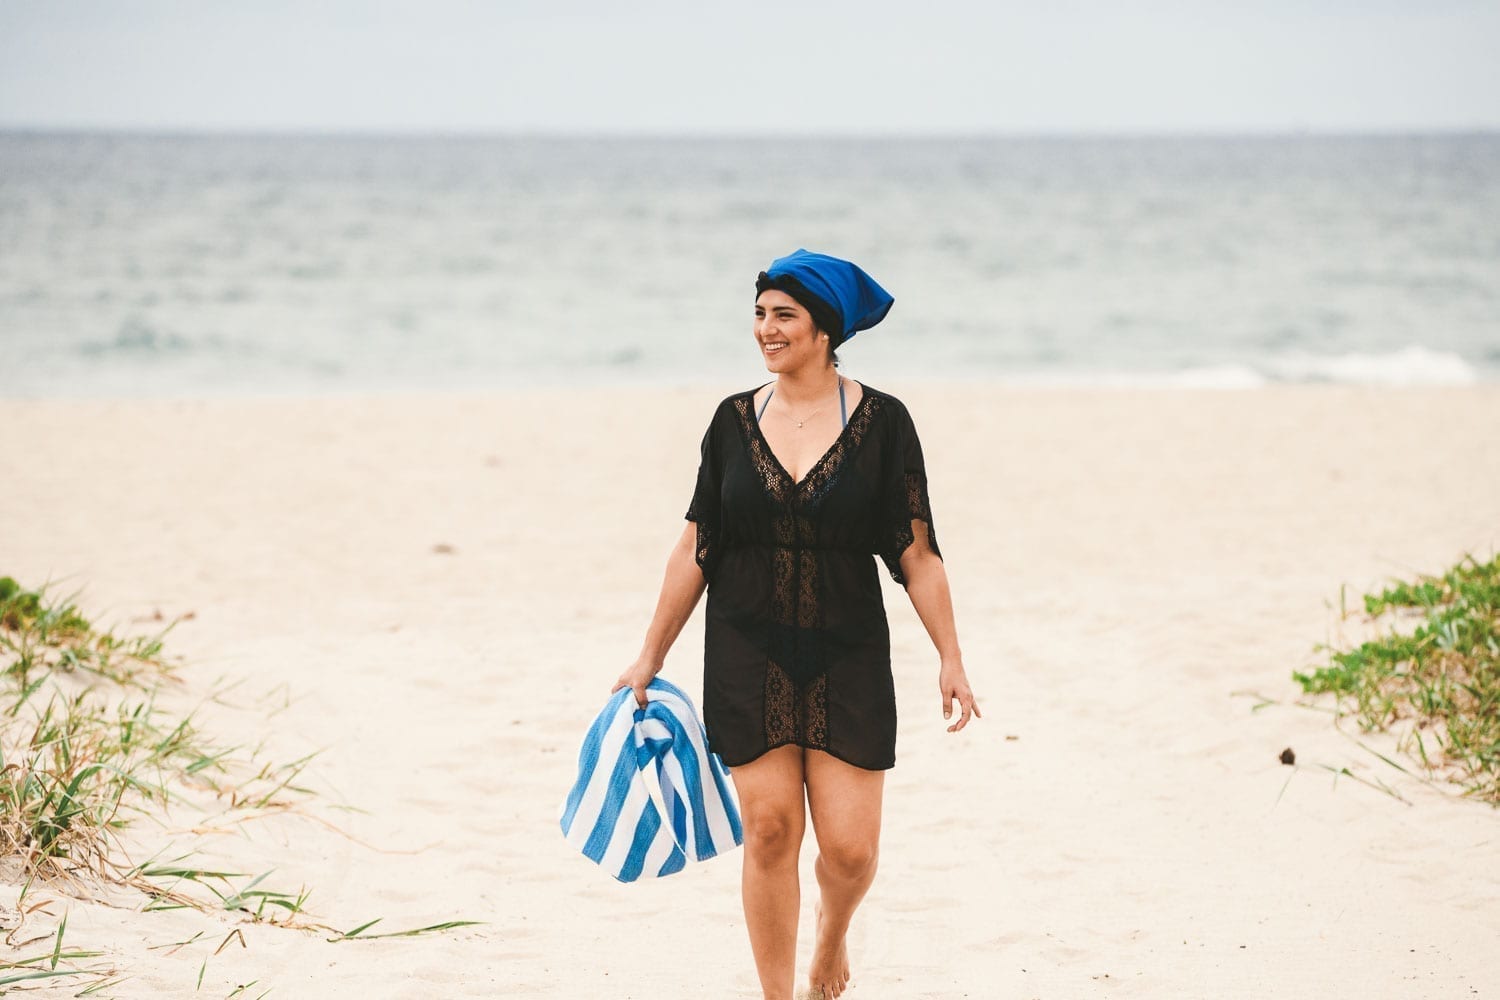 Woman wearing back outfit and blue head covering walking along the beach carrying a blue and white towel smiling looking off to the side